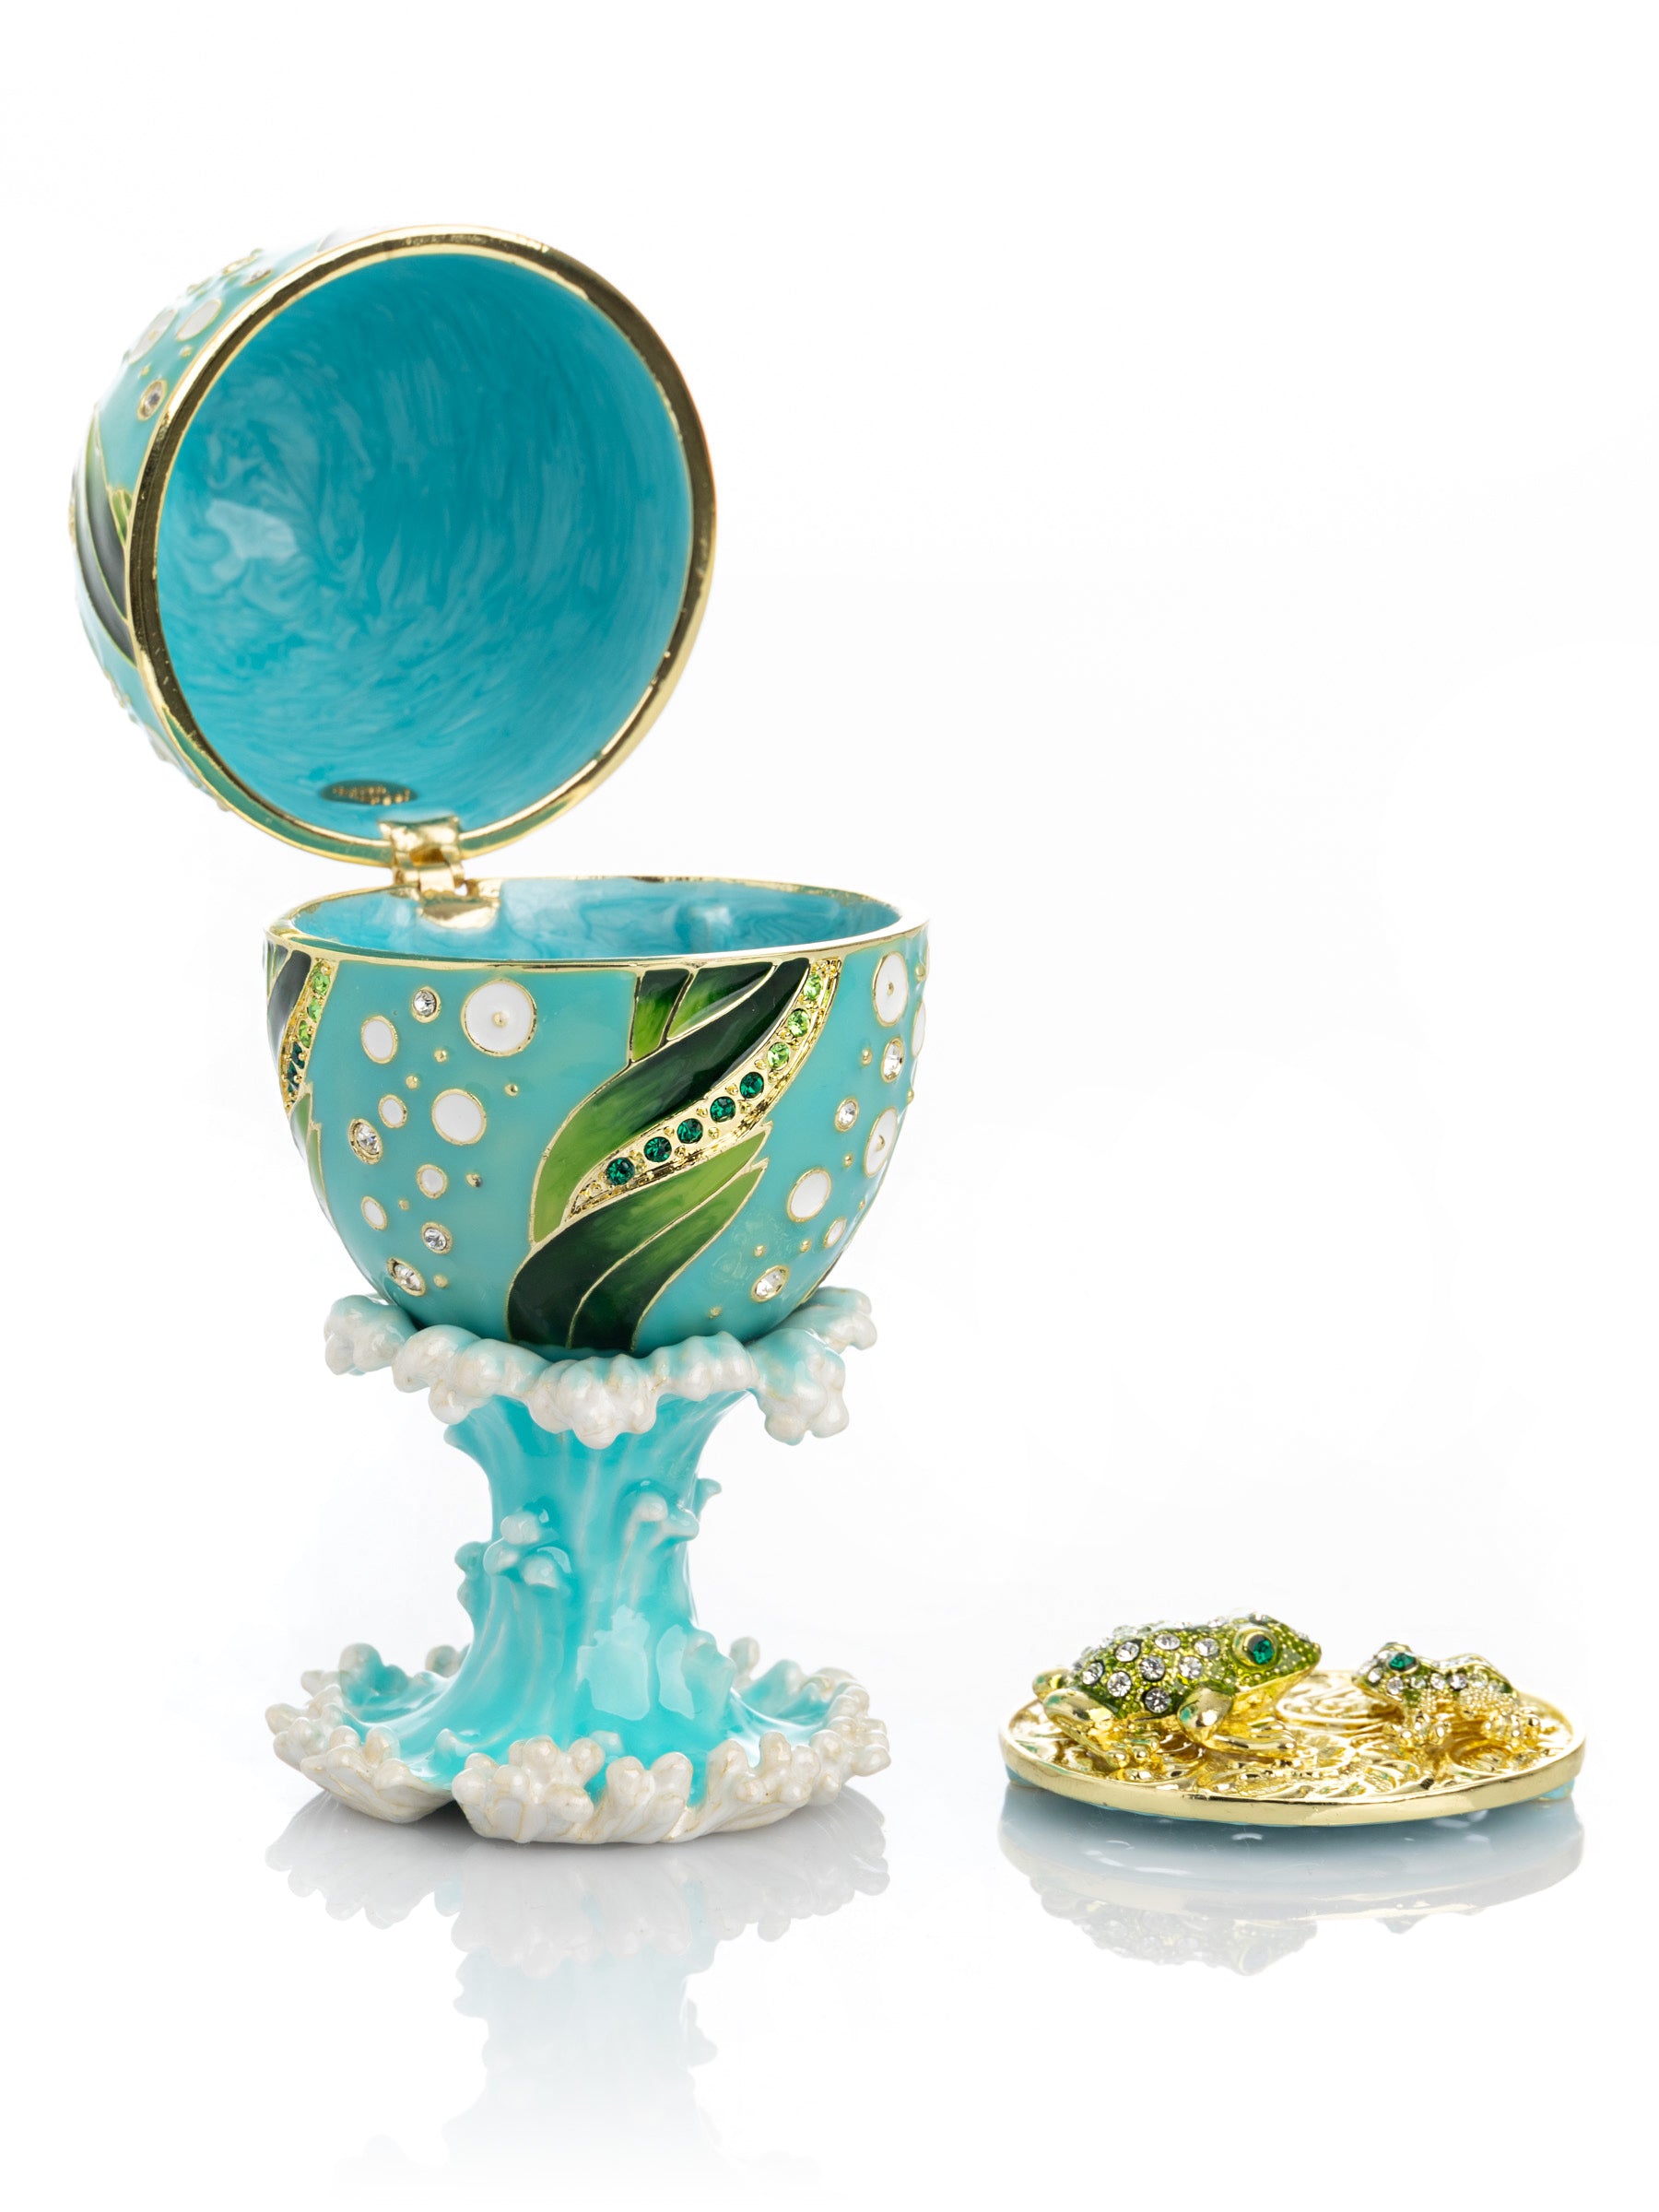 Turquoise Faberge Egg with 2 Frogs Surprise Inside